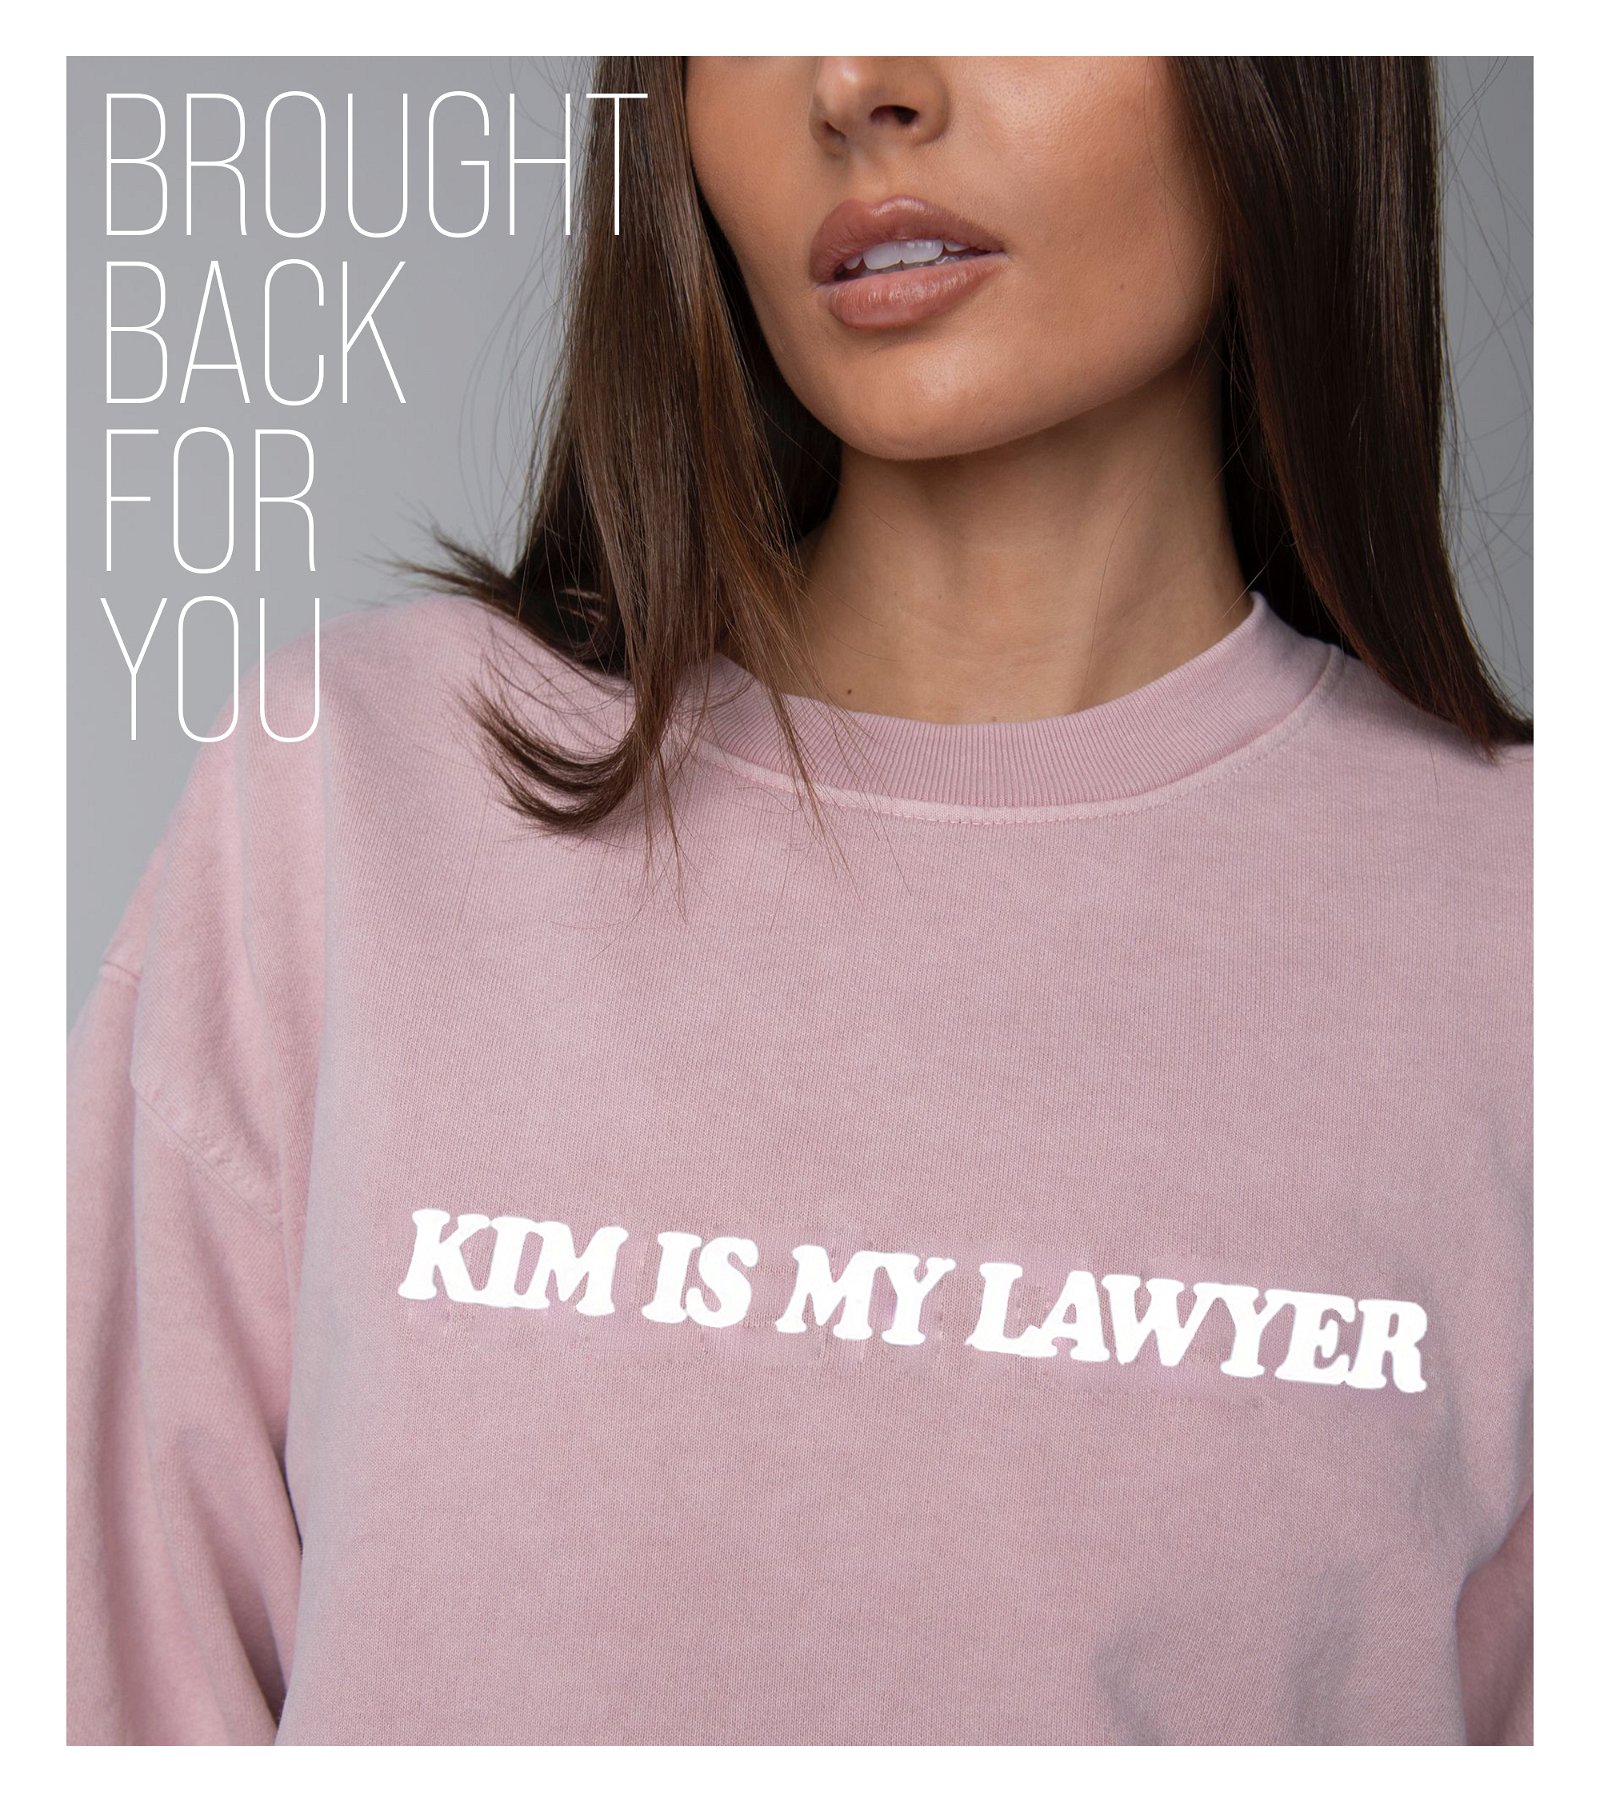 BROUGHT BACK FOR YOU | KIM IS MY LAWYER